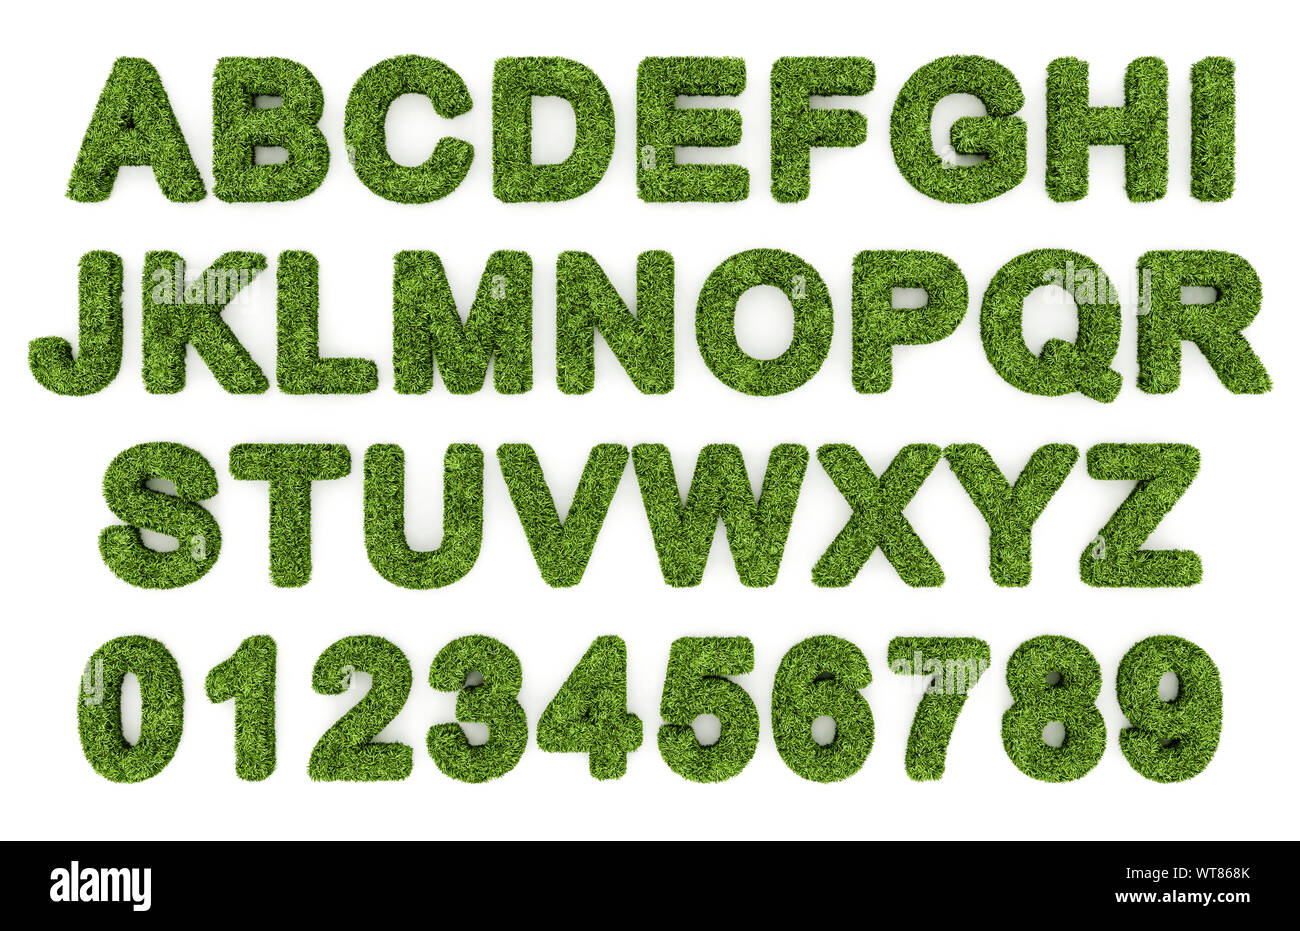 Grass alphabet, letters and numbers Stock Photo